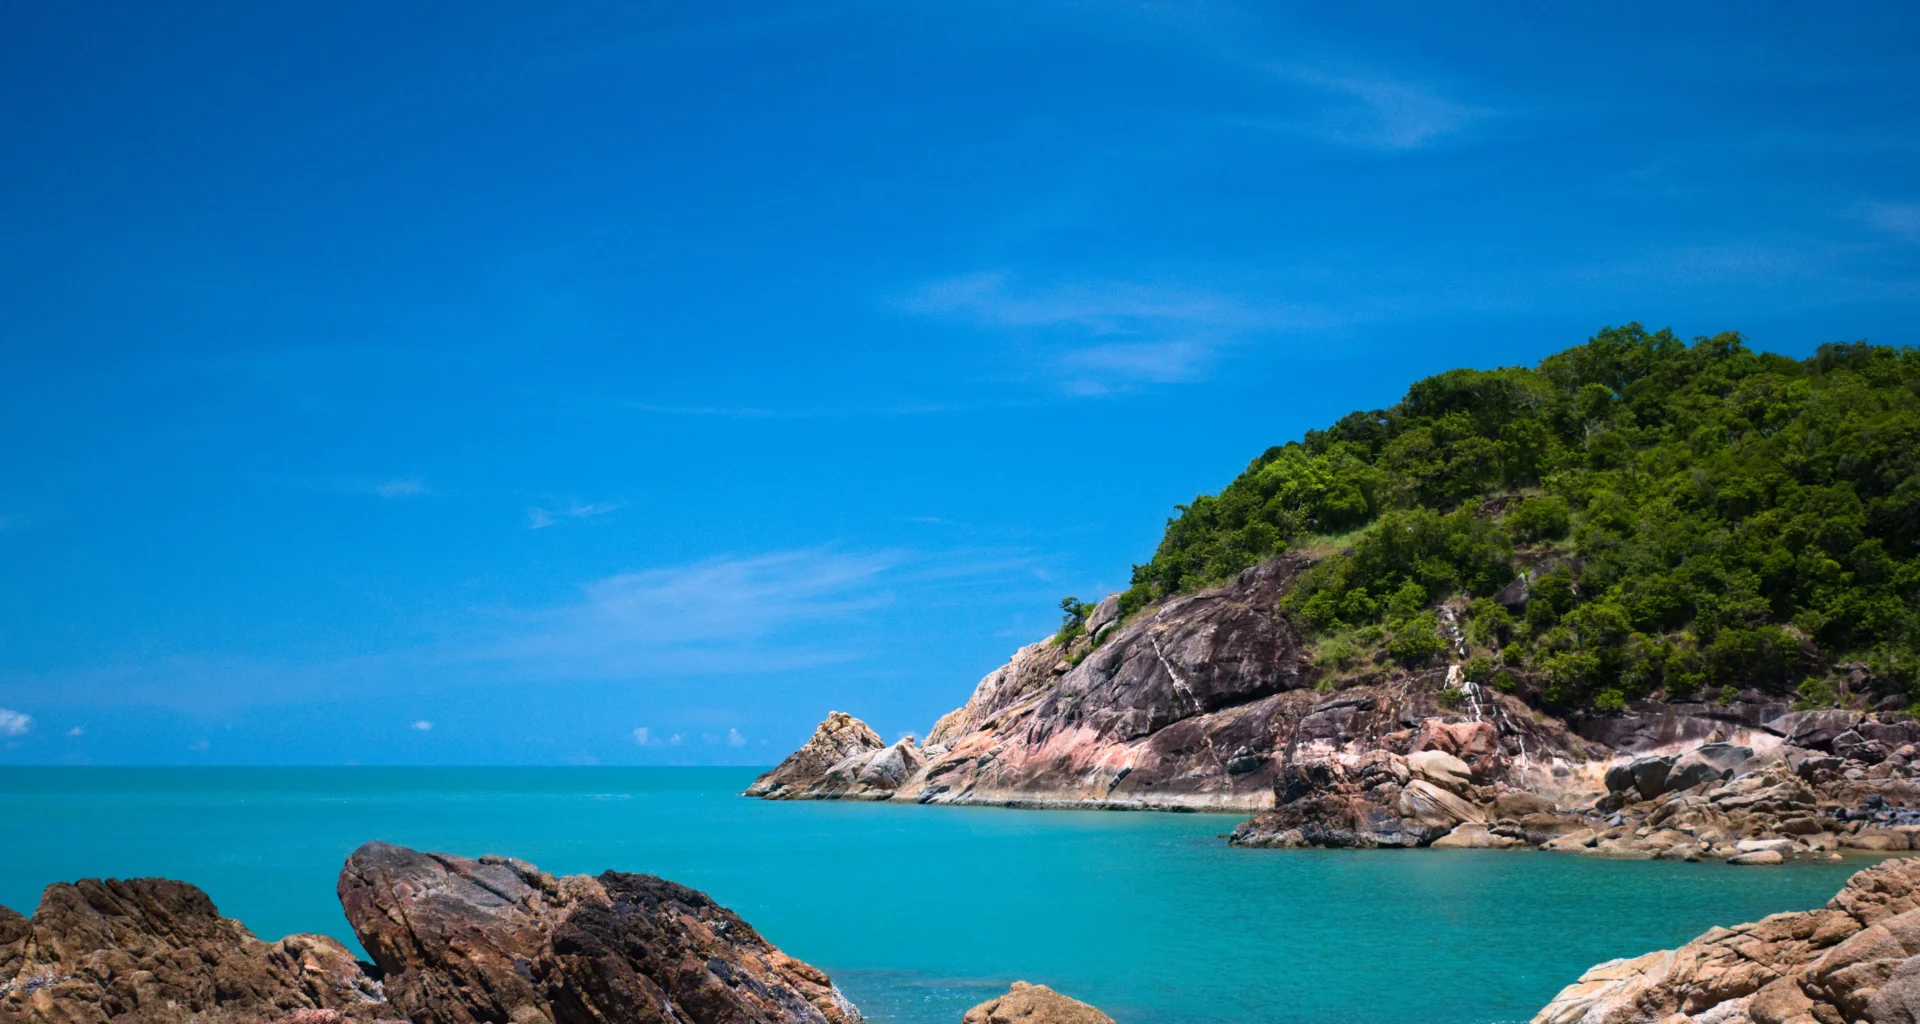 Best hotels and places to stay in Koh Samui